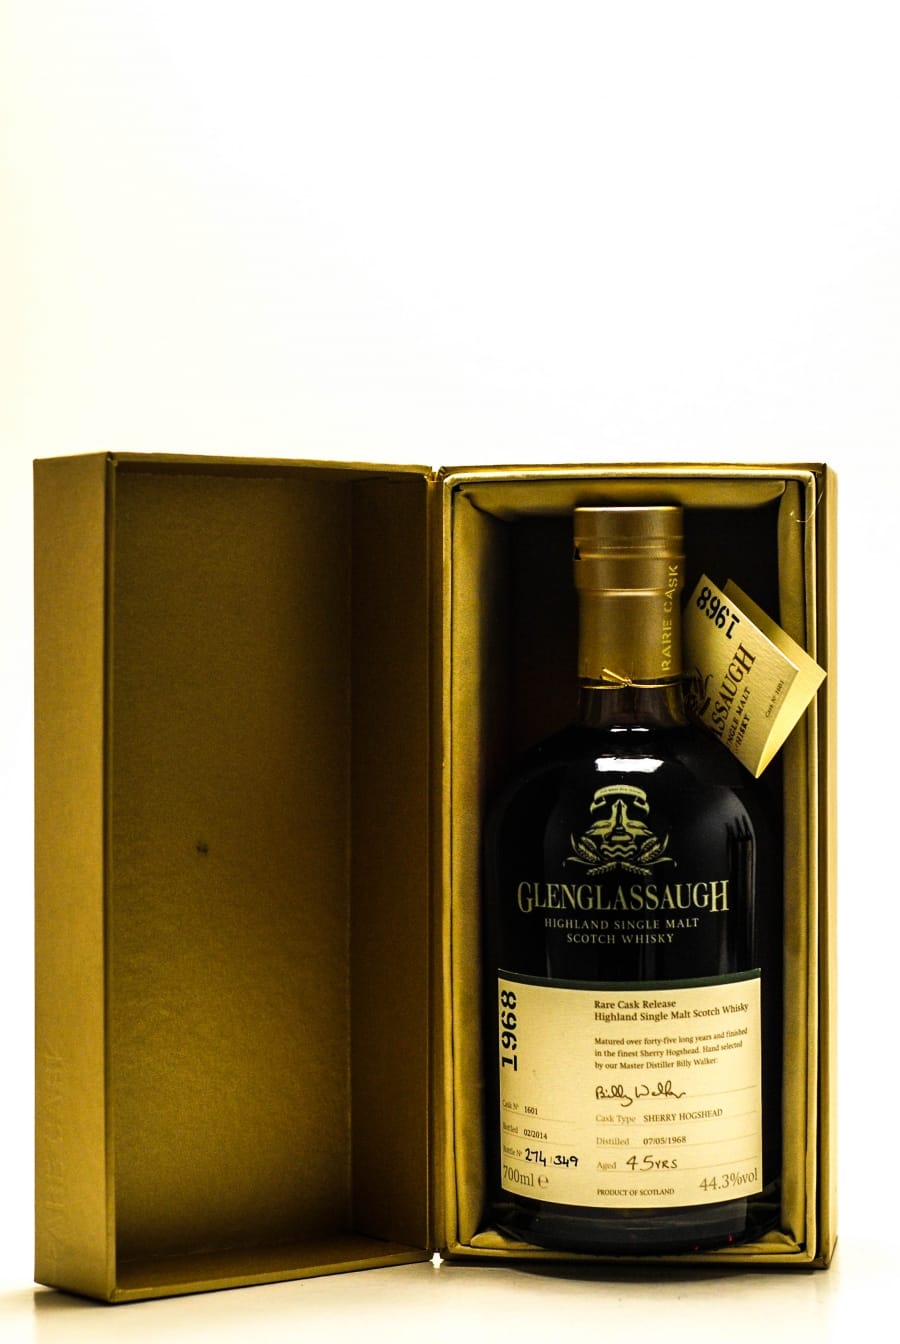 Glenglassaugh - 45 Years Old Rare Cask Release Batch 1 cask:1601 44.3% 1968 Perfect